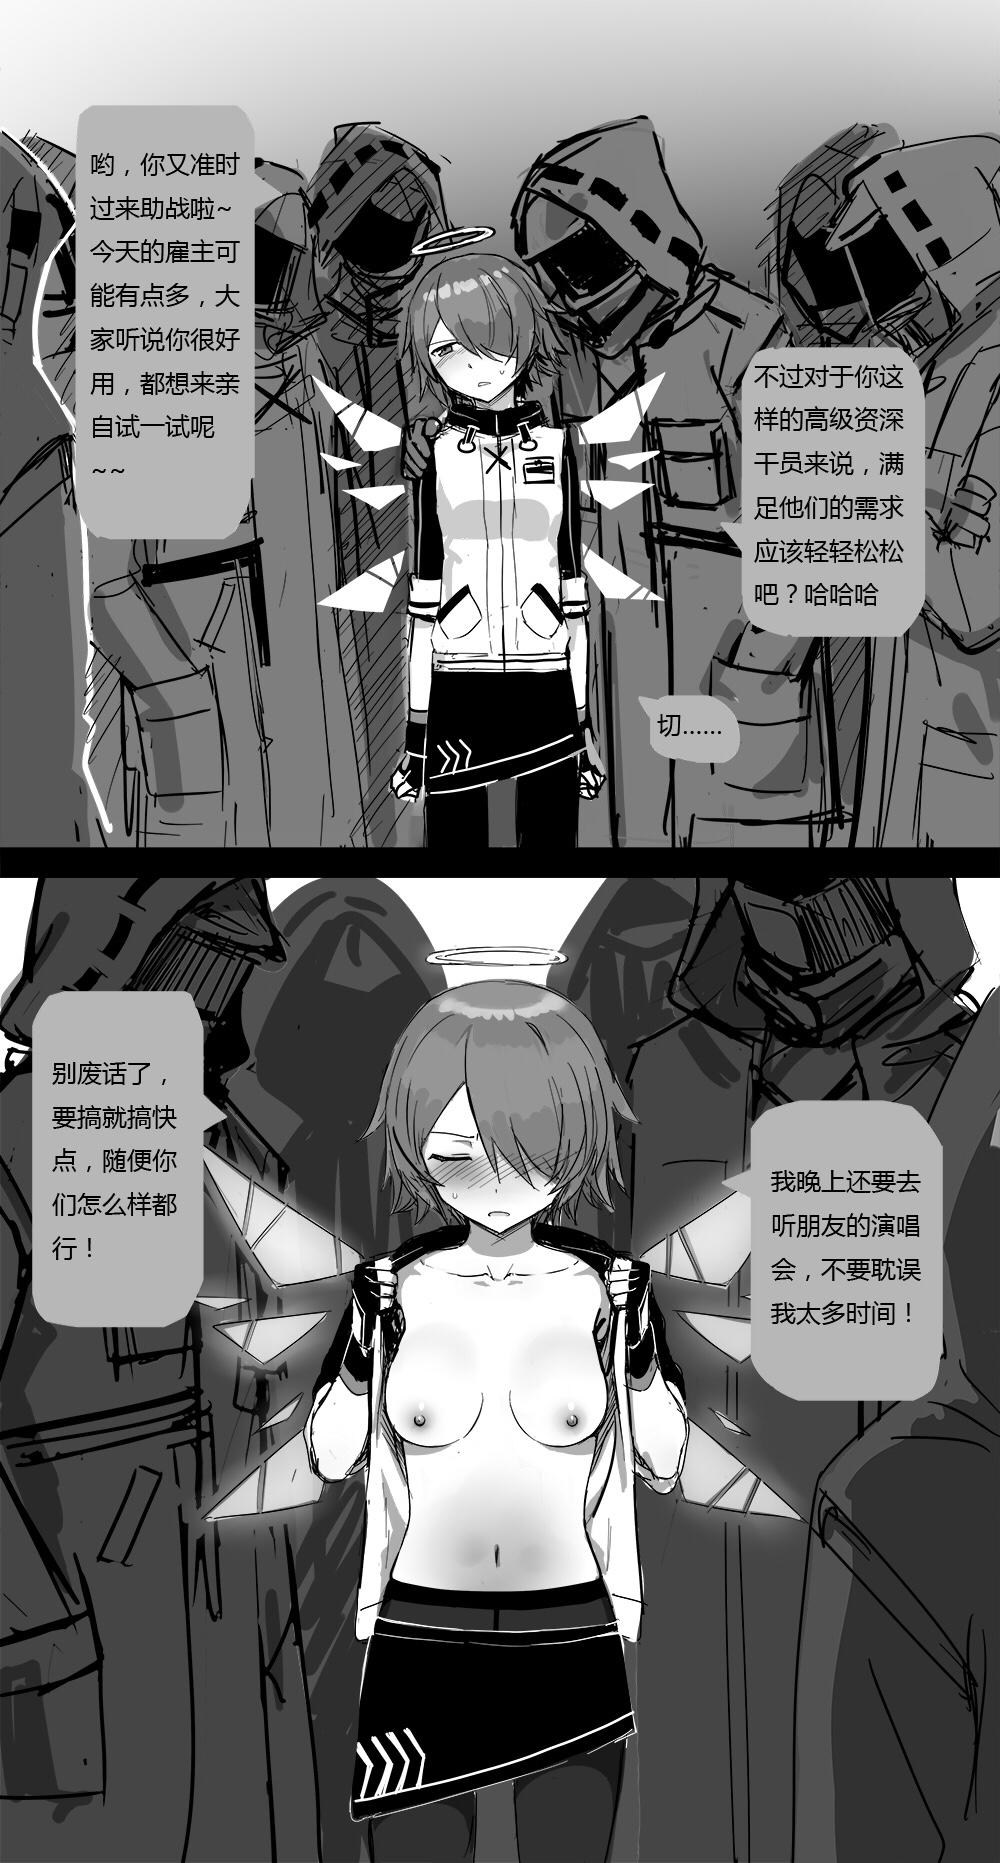 Hot Wife 无能狂怒 - Arknights Doggystyle Porn - Page 6